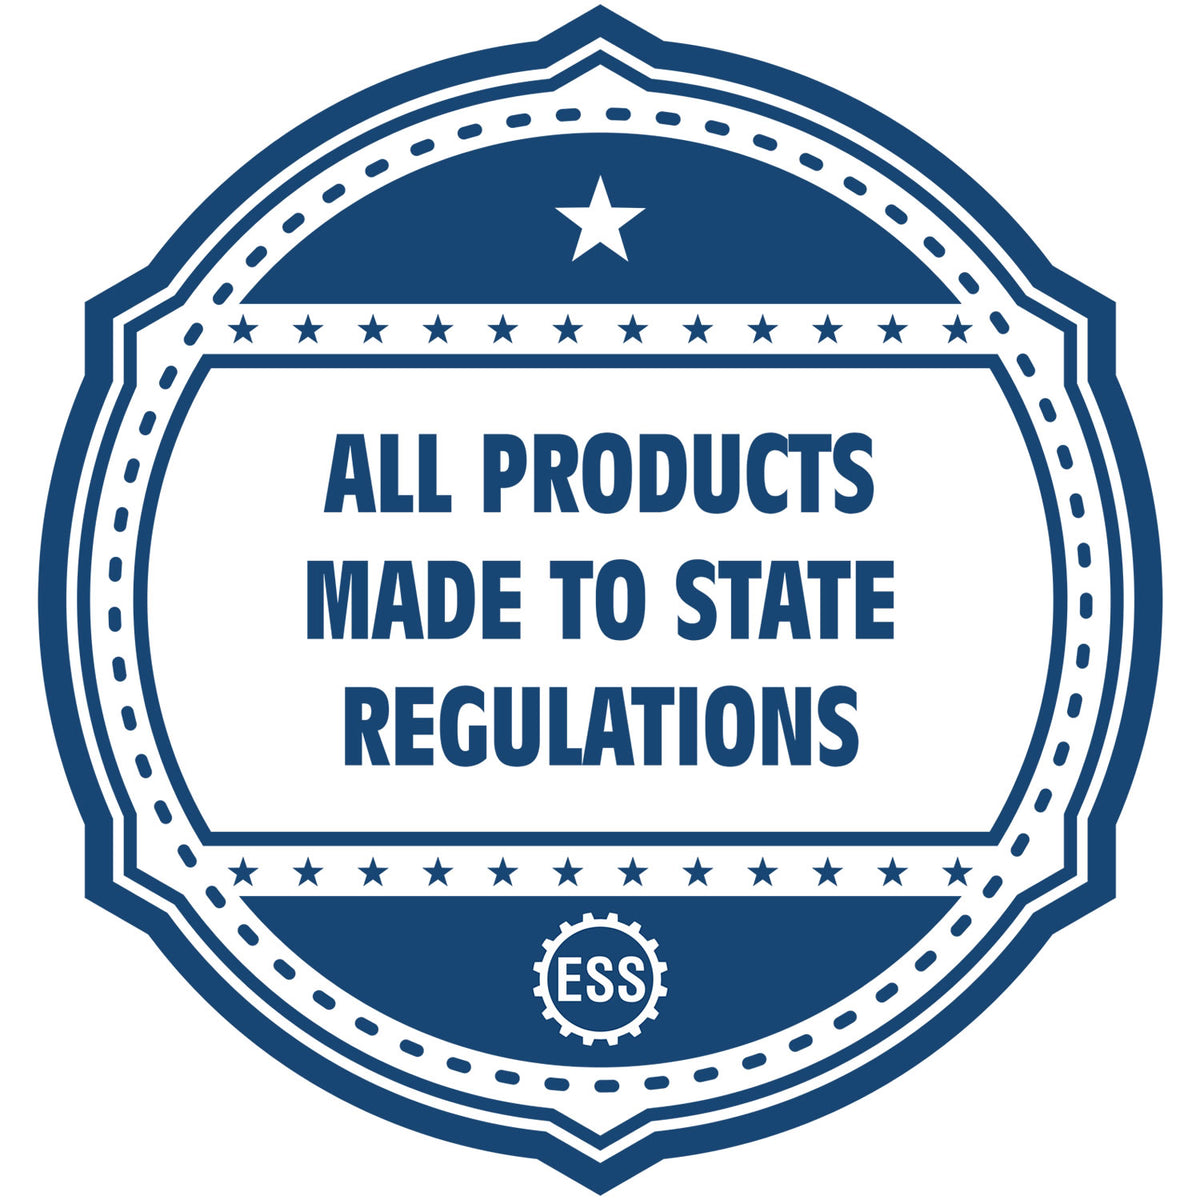 An icon or badge element for the Handheld Illinois Architect Seal Embosser showing that this product is made in compliance with state regulations.